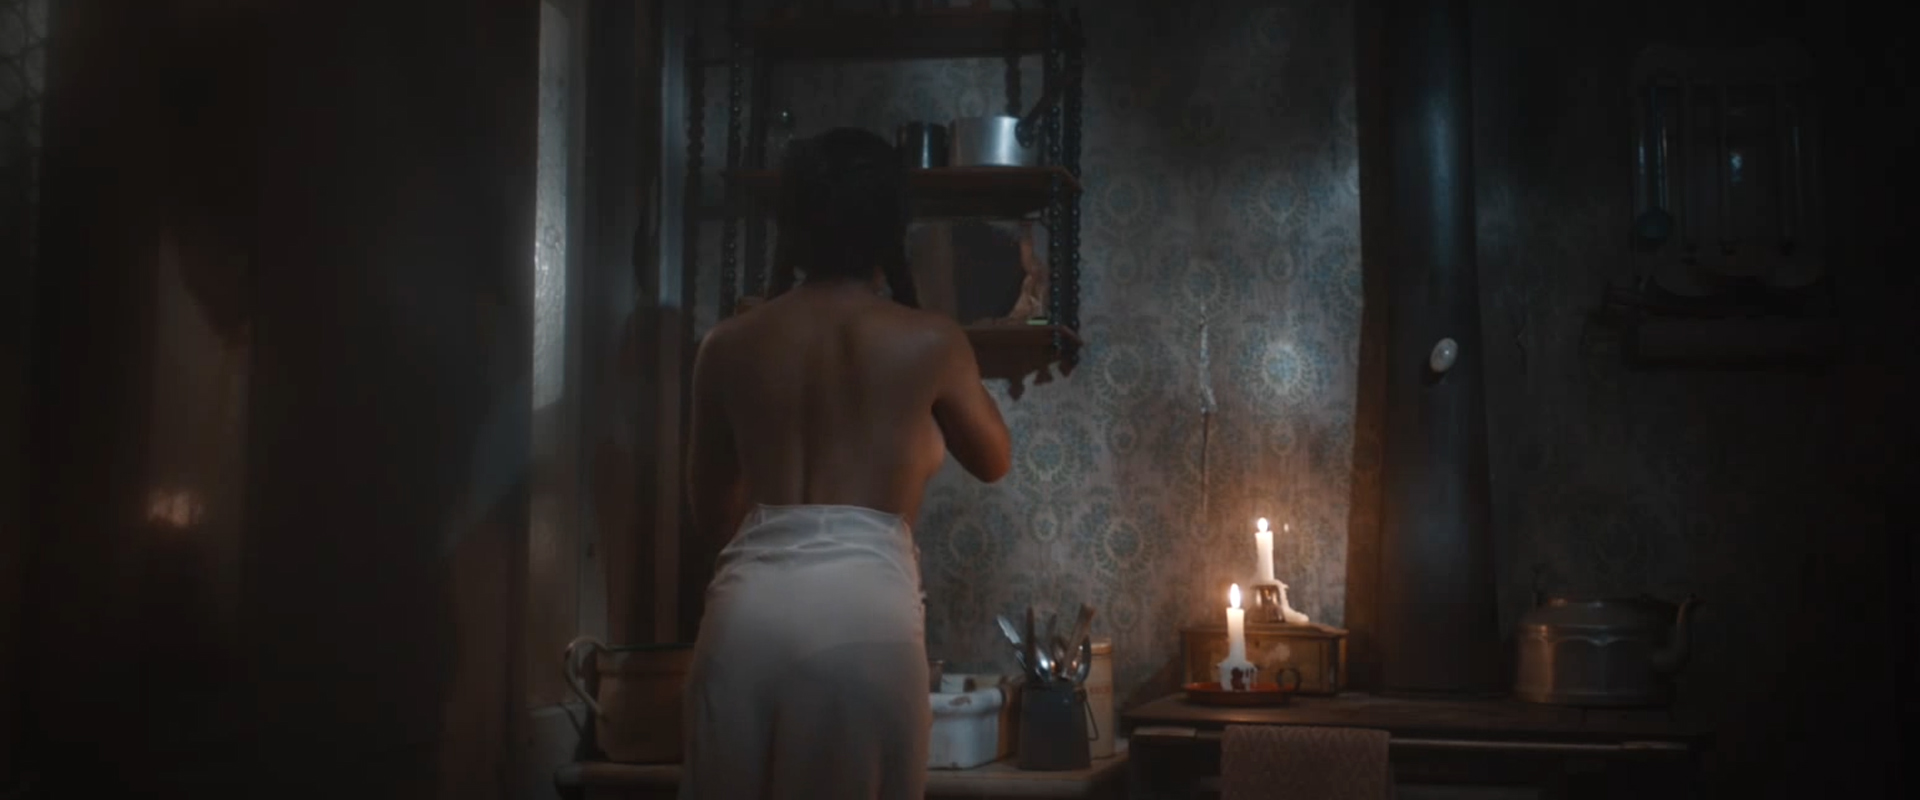 Amandla Stenberg (20 y.o.) shows butt from nude clip in Where Hands Touch (...